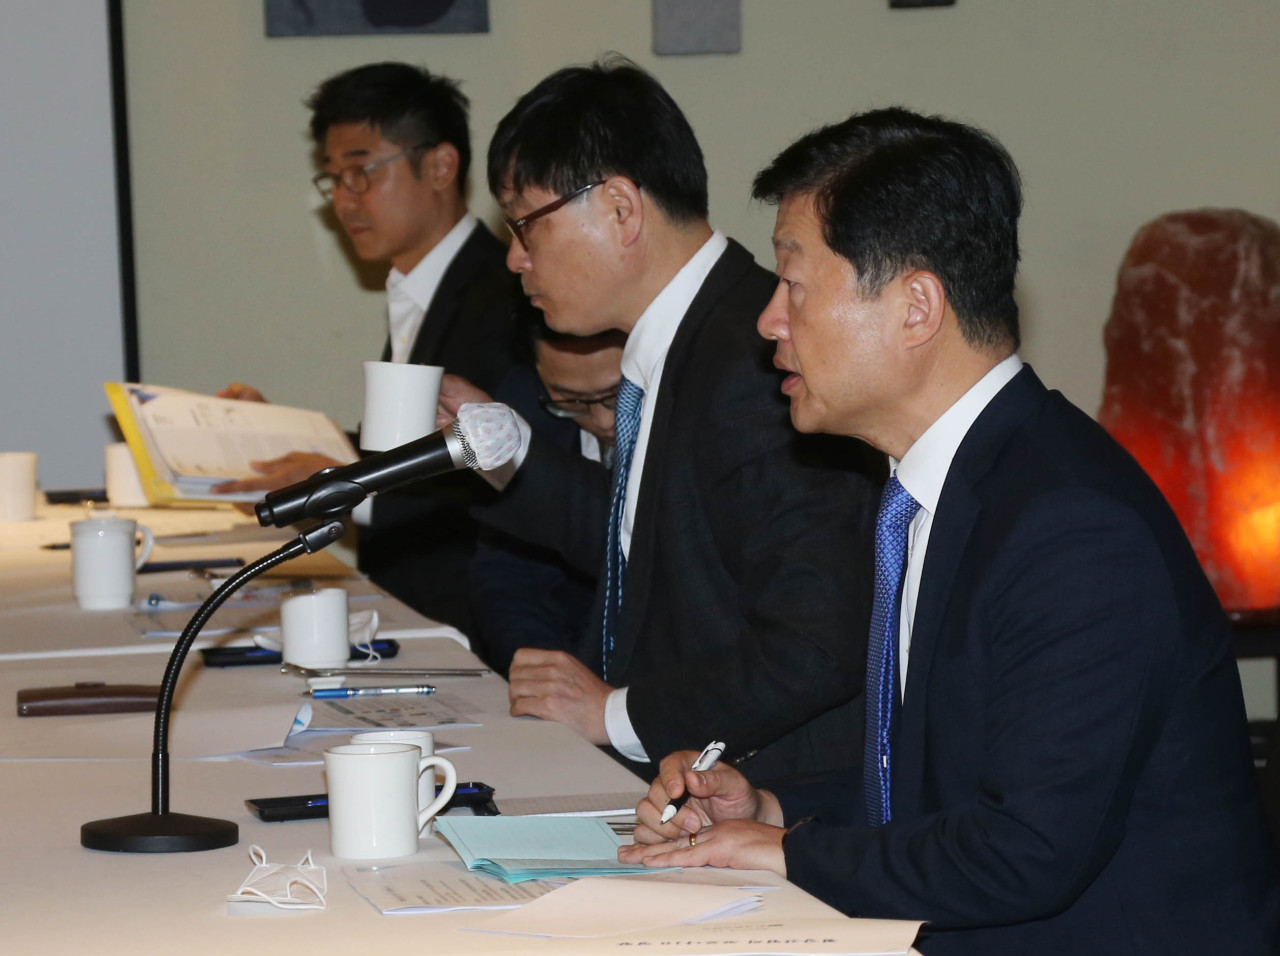 The Korea Chamber of Commerce and Industry’s Vice Chairman Woo Tae-hee speaks at a meeting with industry counterparts over coronavirus measures on Thursday. (KCCI)